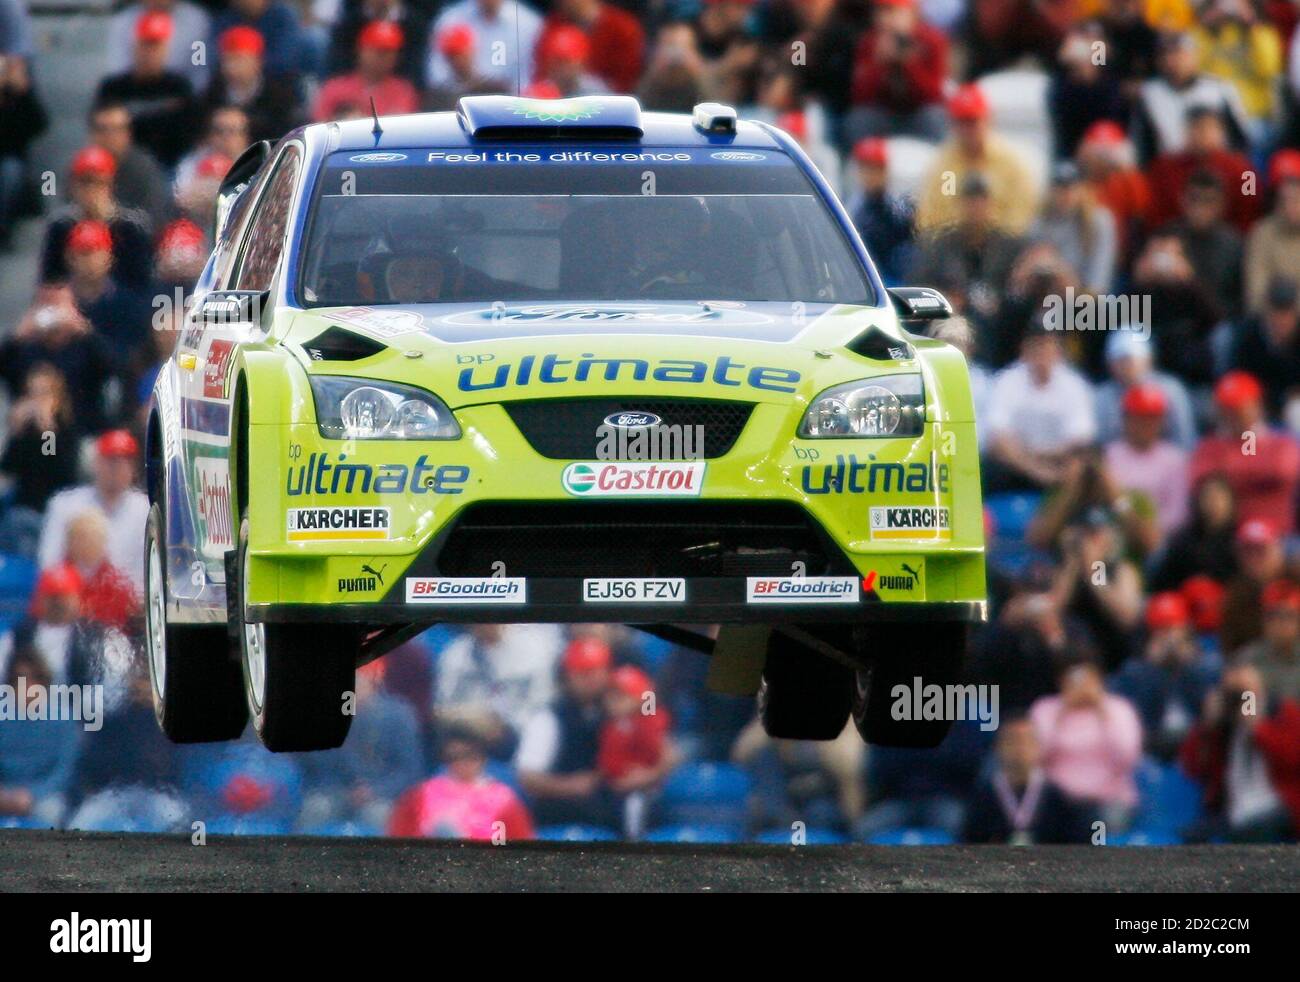 Marcus Gonholm of Finland drives his Ford RS WRC during the first super  special first stage of the Portugal Rally in Algarve March 29, 2007.  REUTERS/Jose Manuel Ribeiro (PORTUGAL Stock Photo - Alamy